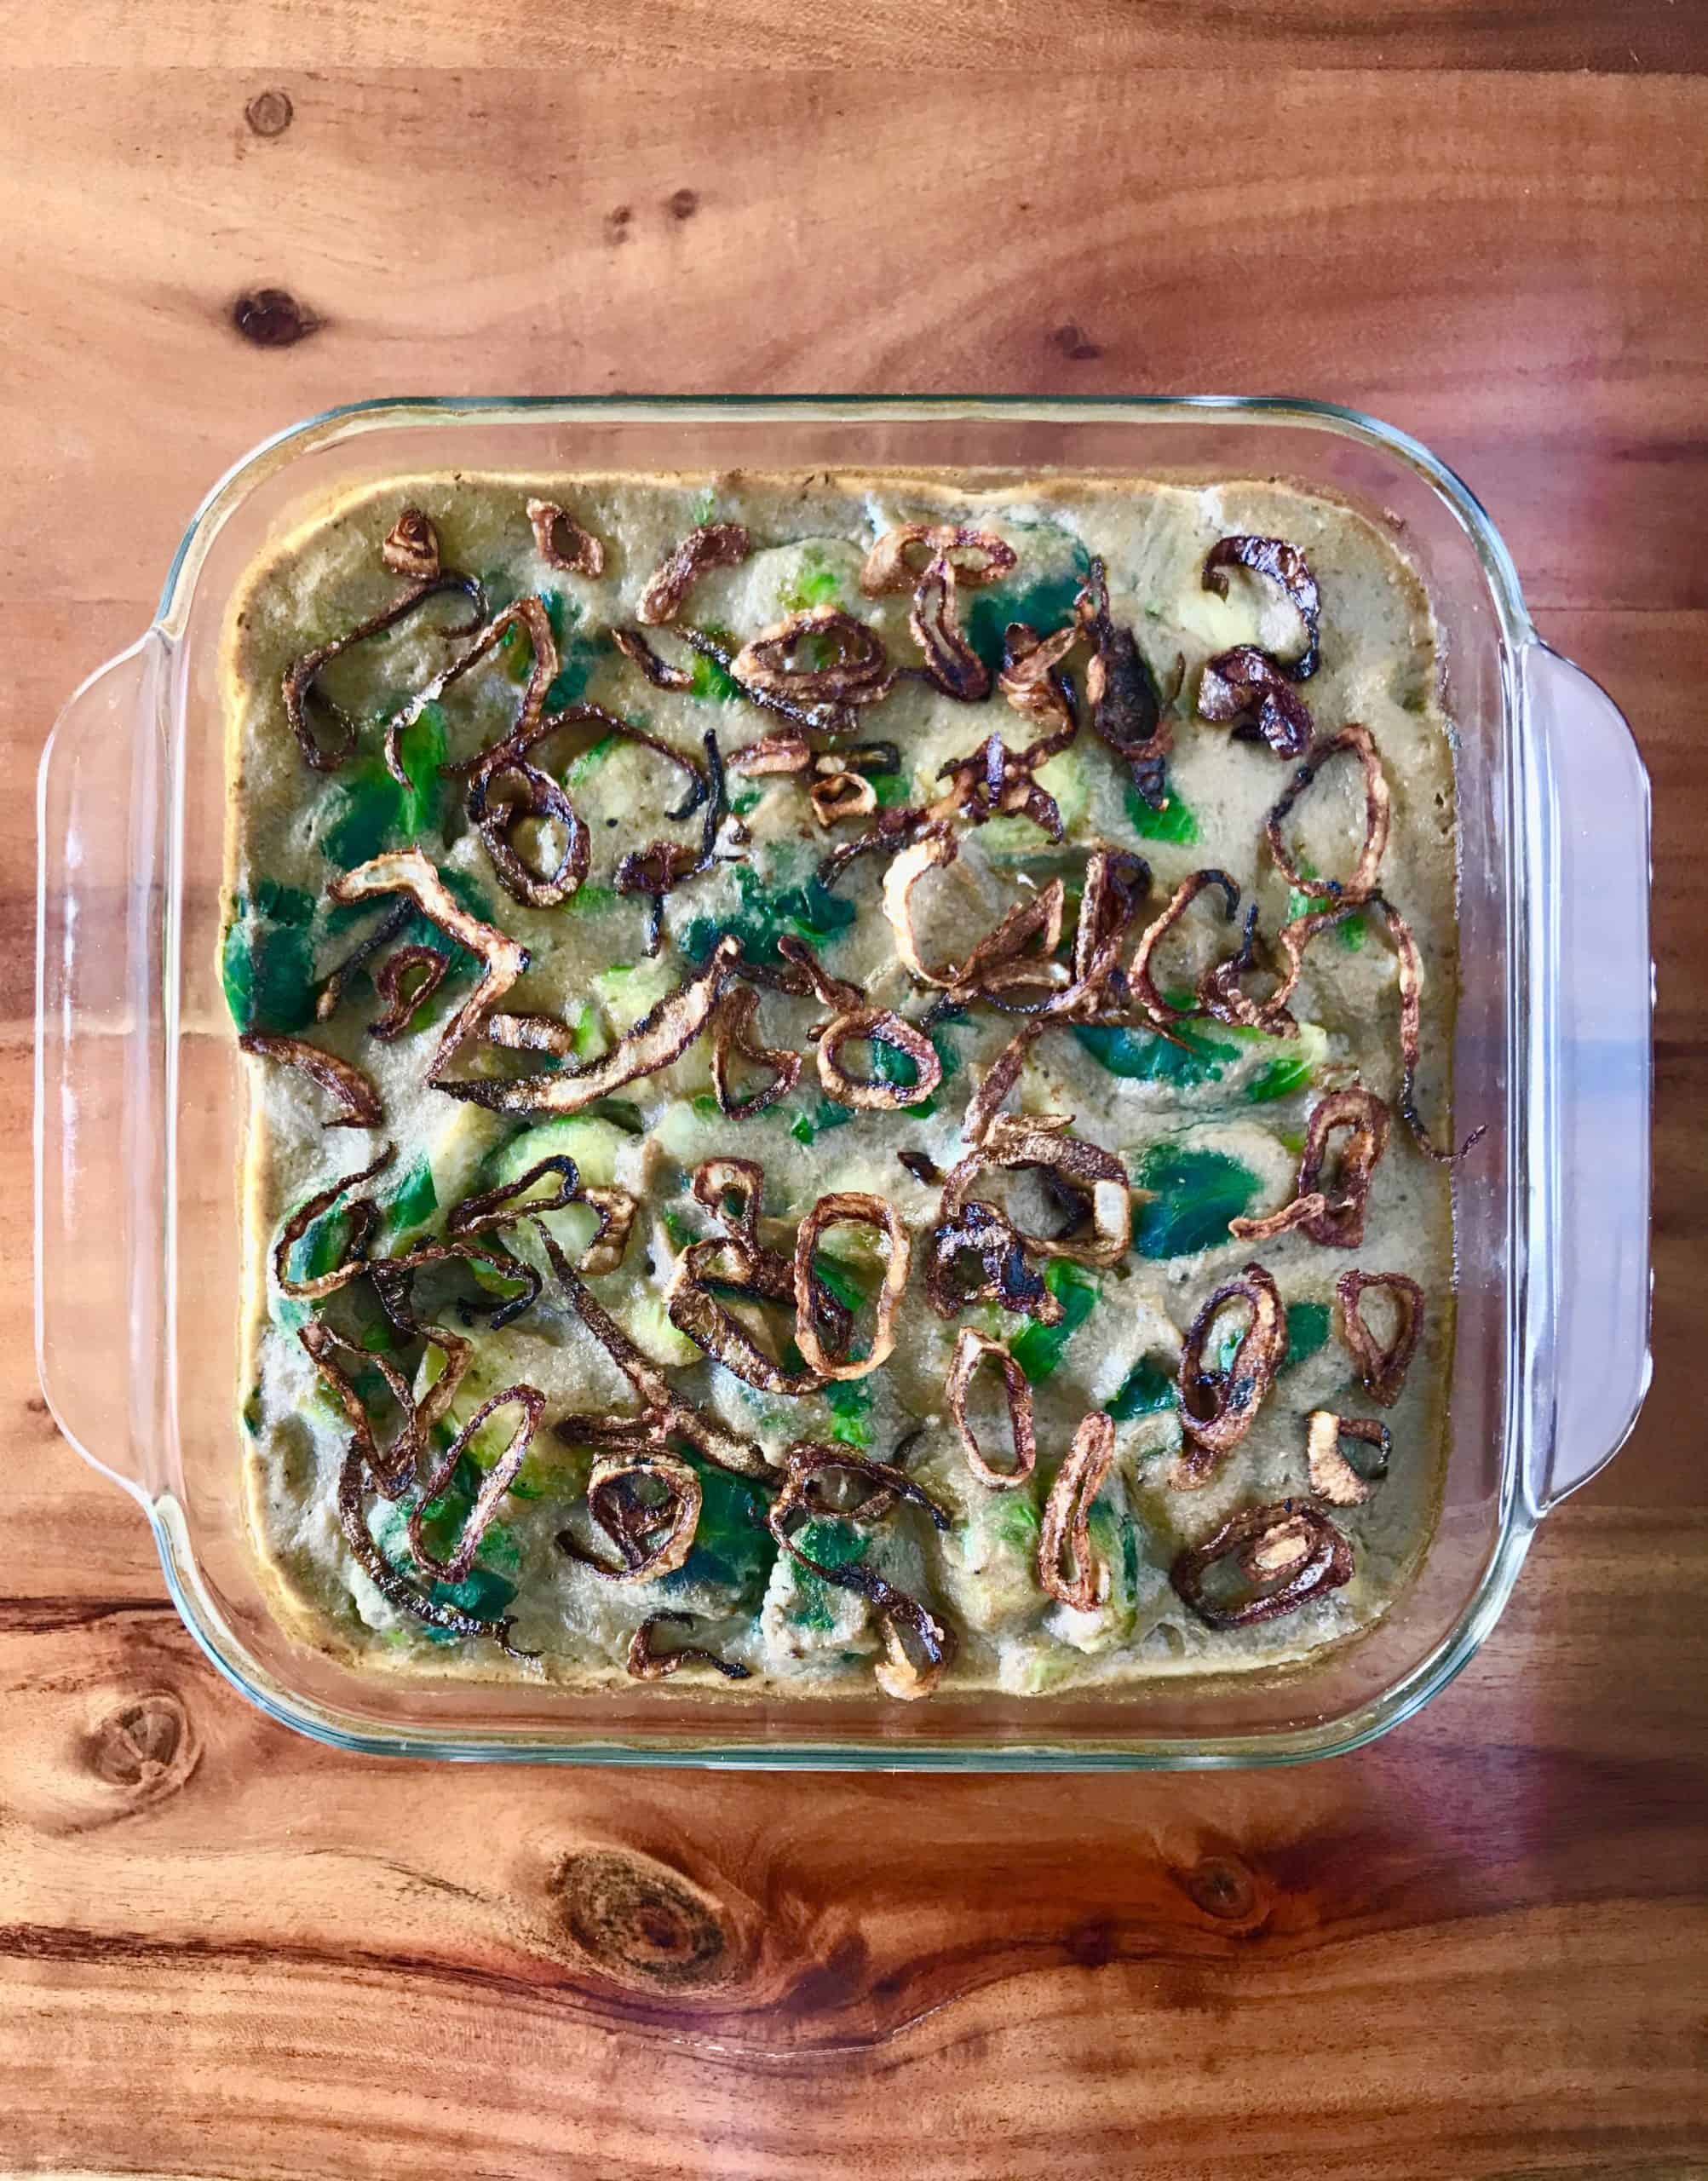 Brussels Sprouts Casserole in a glass dish on a wooden table